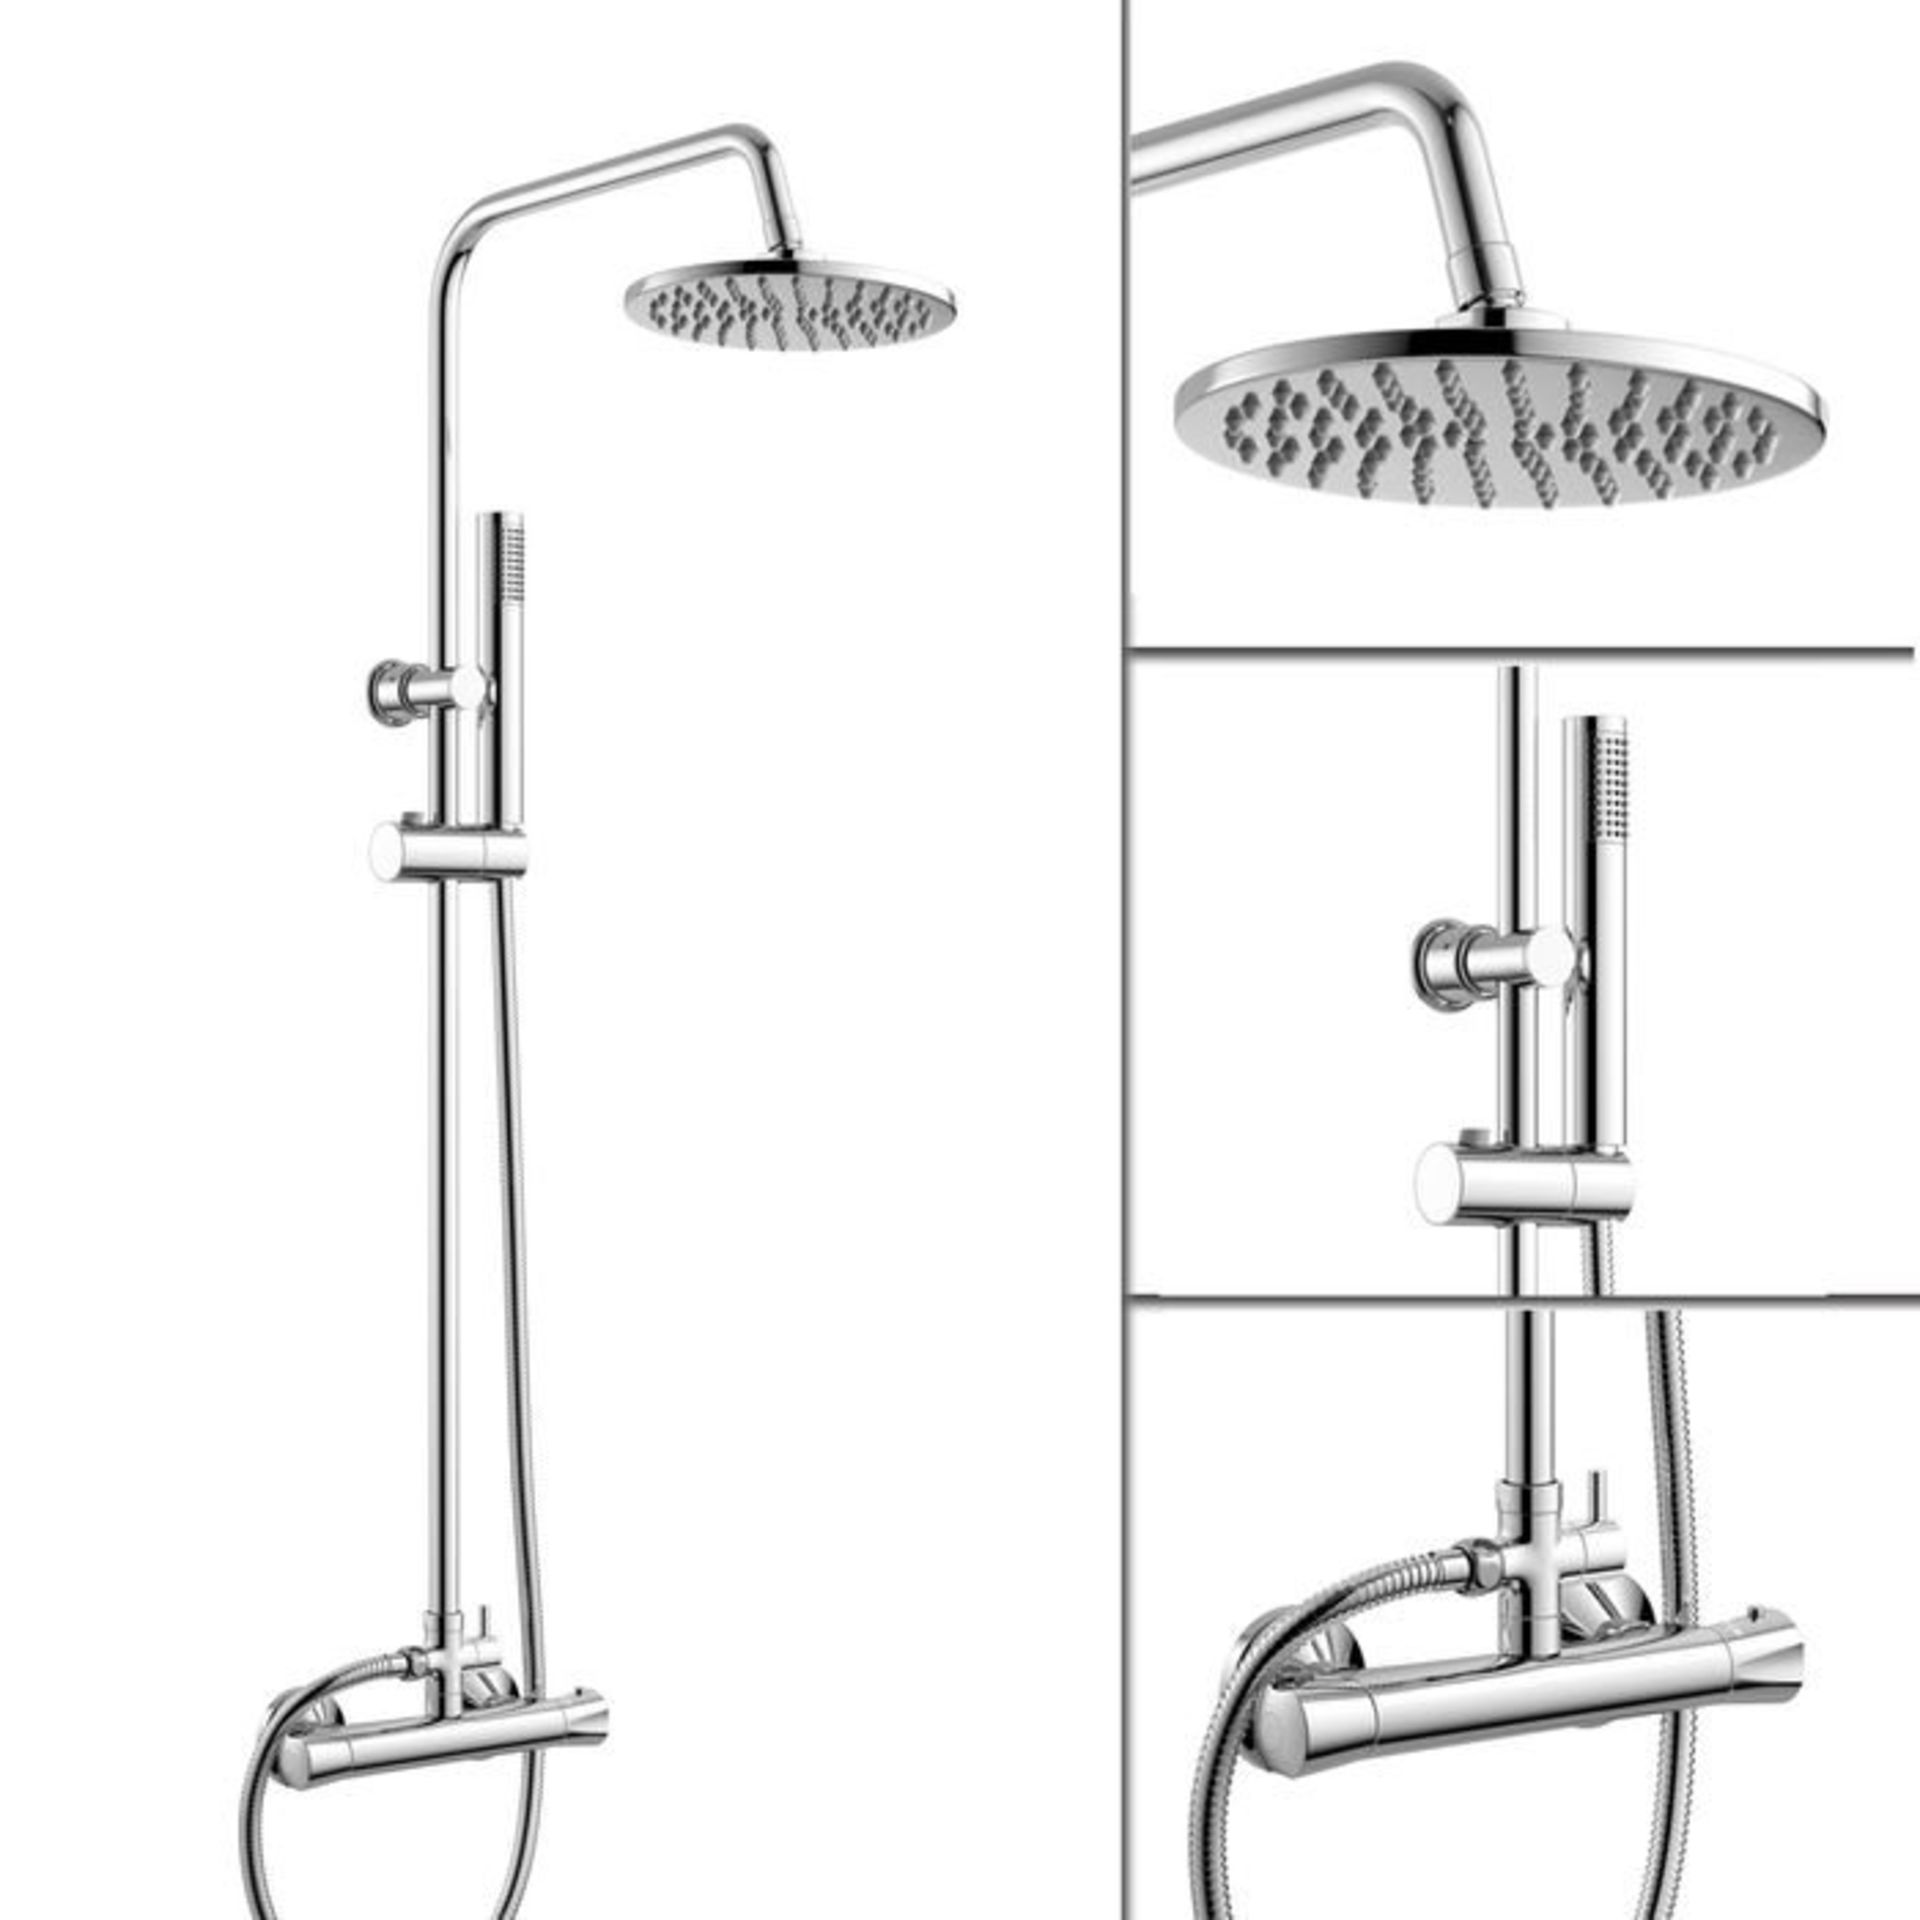 (E63) 200mm Round Head Thermostatic Exposed Shower Kit & Hand Held. Family friendly detachable - Image 2 of 2